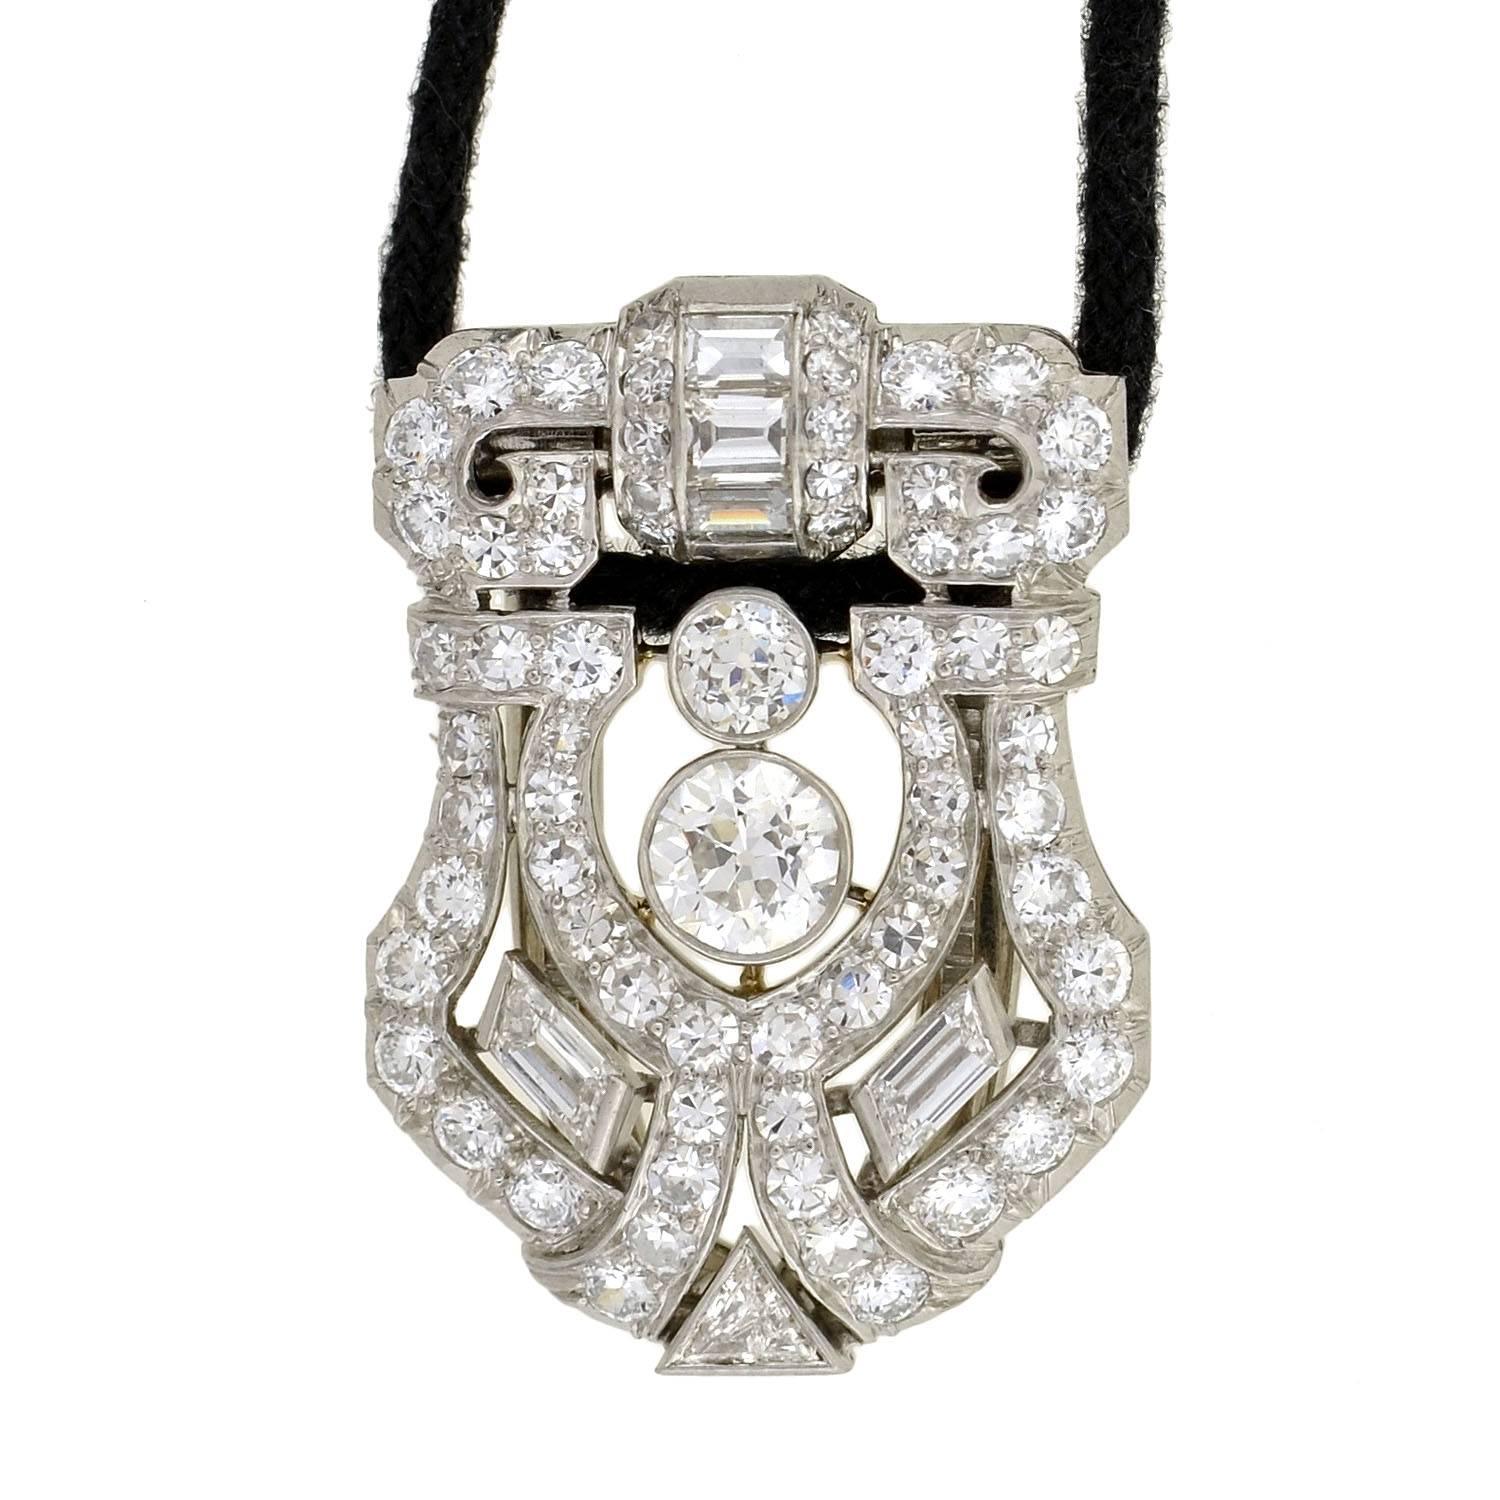 A magnificent platinum and diamond clip pendant necklace from the Art Deco (ca1920) era! This exceptional piece is comprised of a shield shaped clip pendant that is encrusted with sparkling diamonds. The pendant is made of platinum and has over